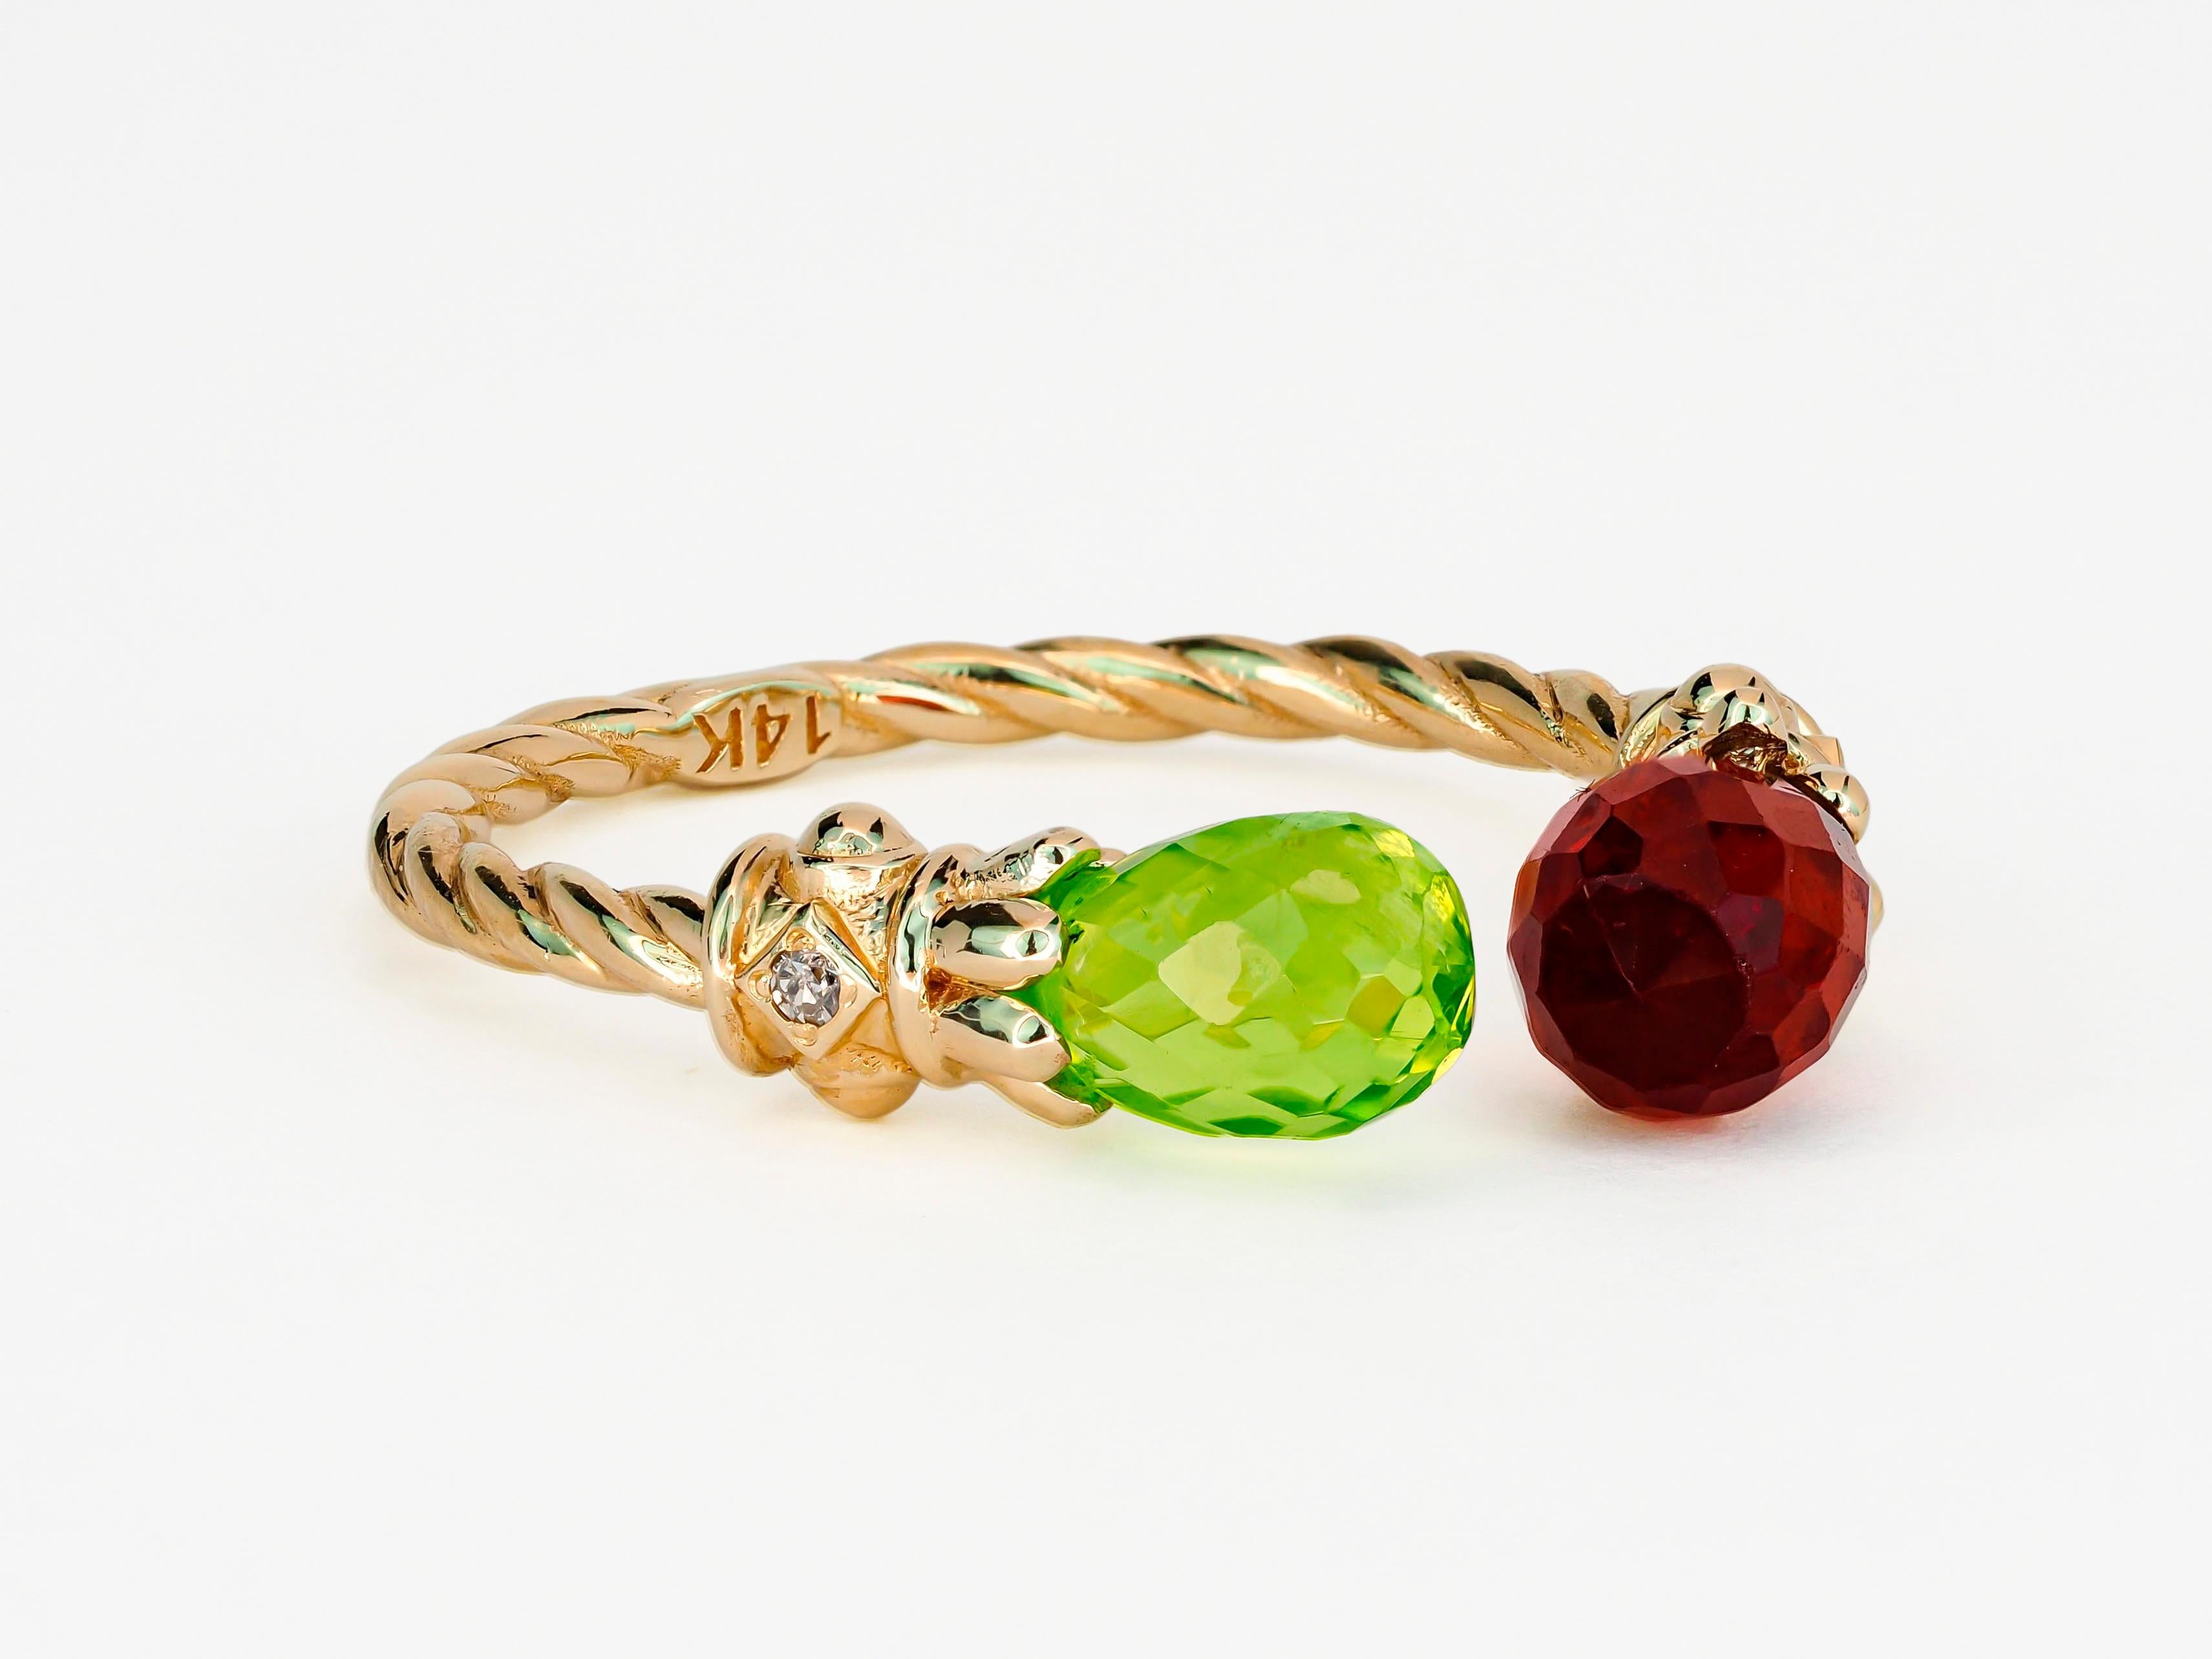 For Sale:   Open ended gold ring with peridot, garnet and diamonds 15